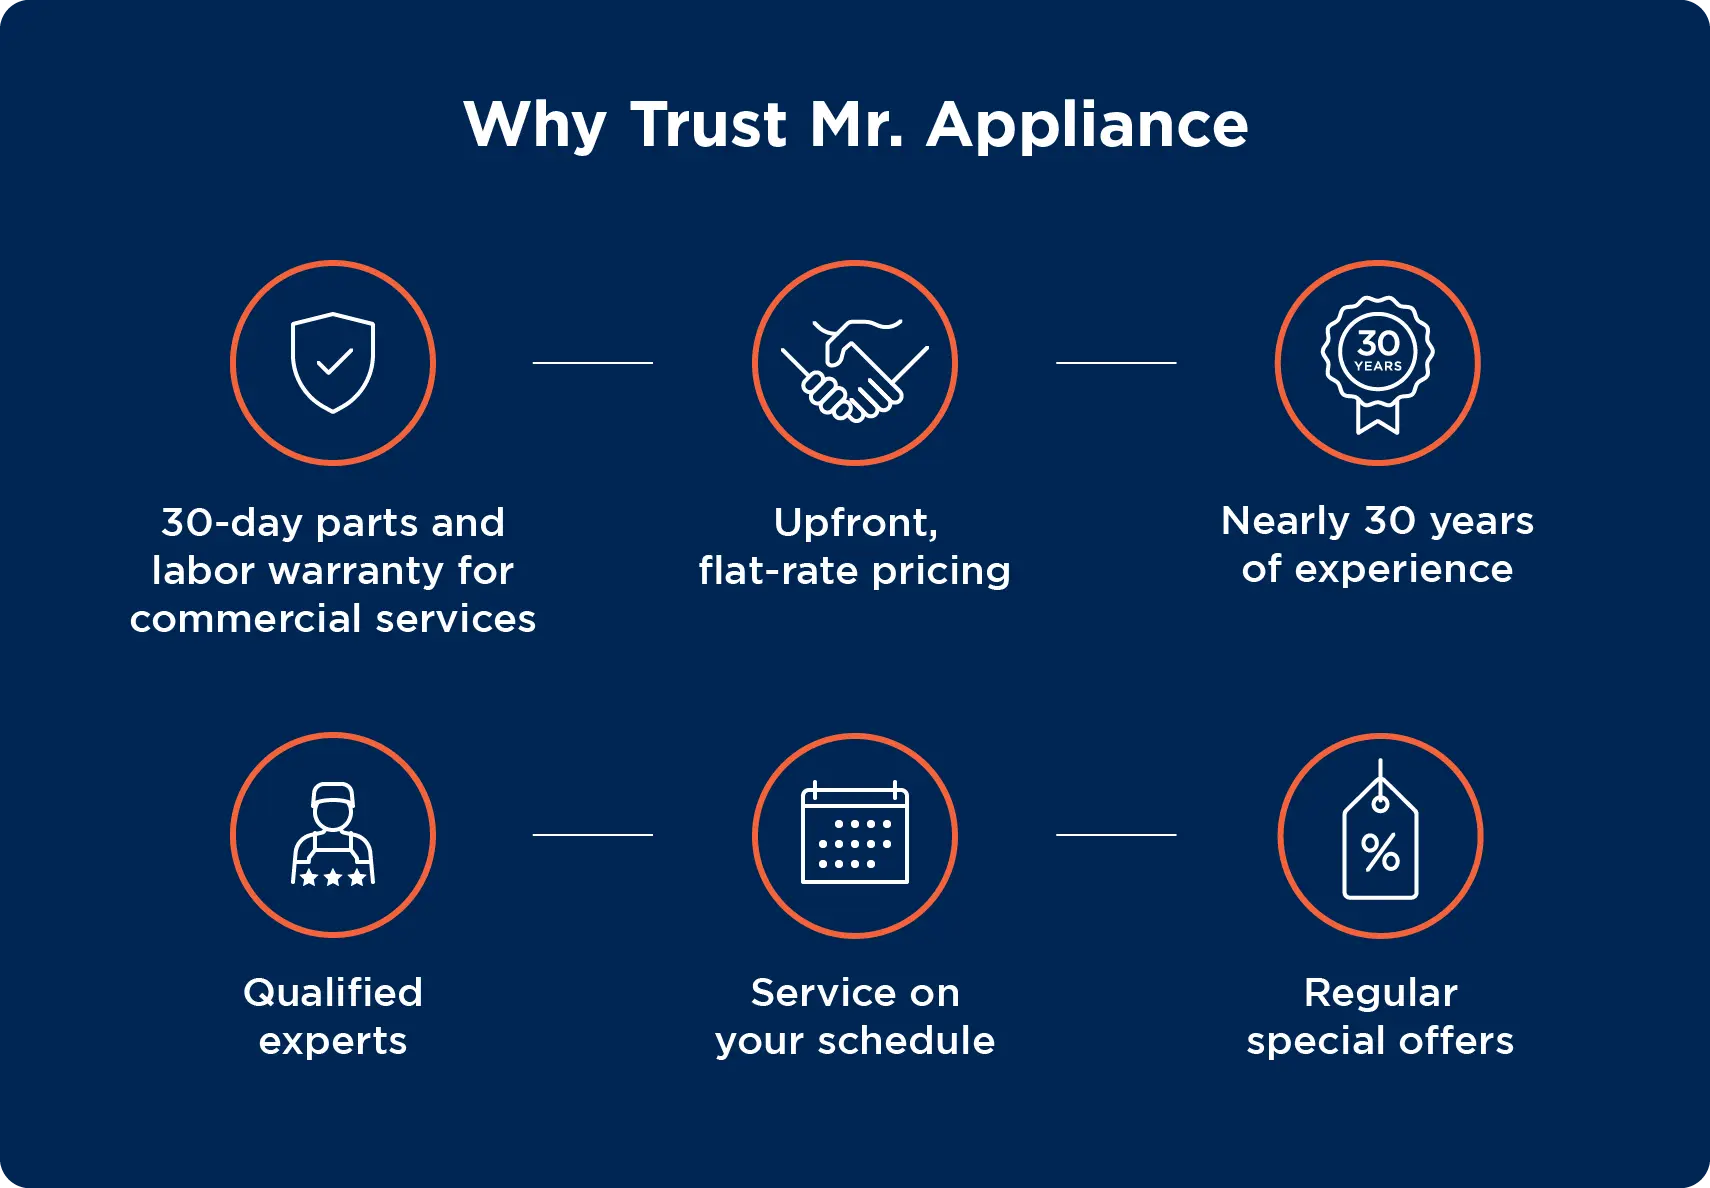 The reasons to choose Mr. Appliance: 30-day parts and labor warranty for commercial services; upfront, flat-rate pricing; nearly 30 years of experience; qualified experts; service on your schedule; regular special offers